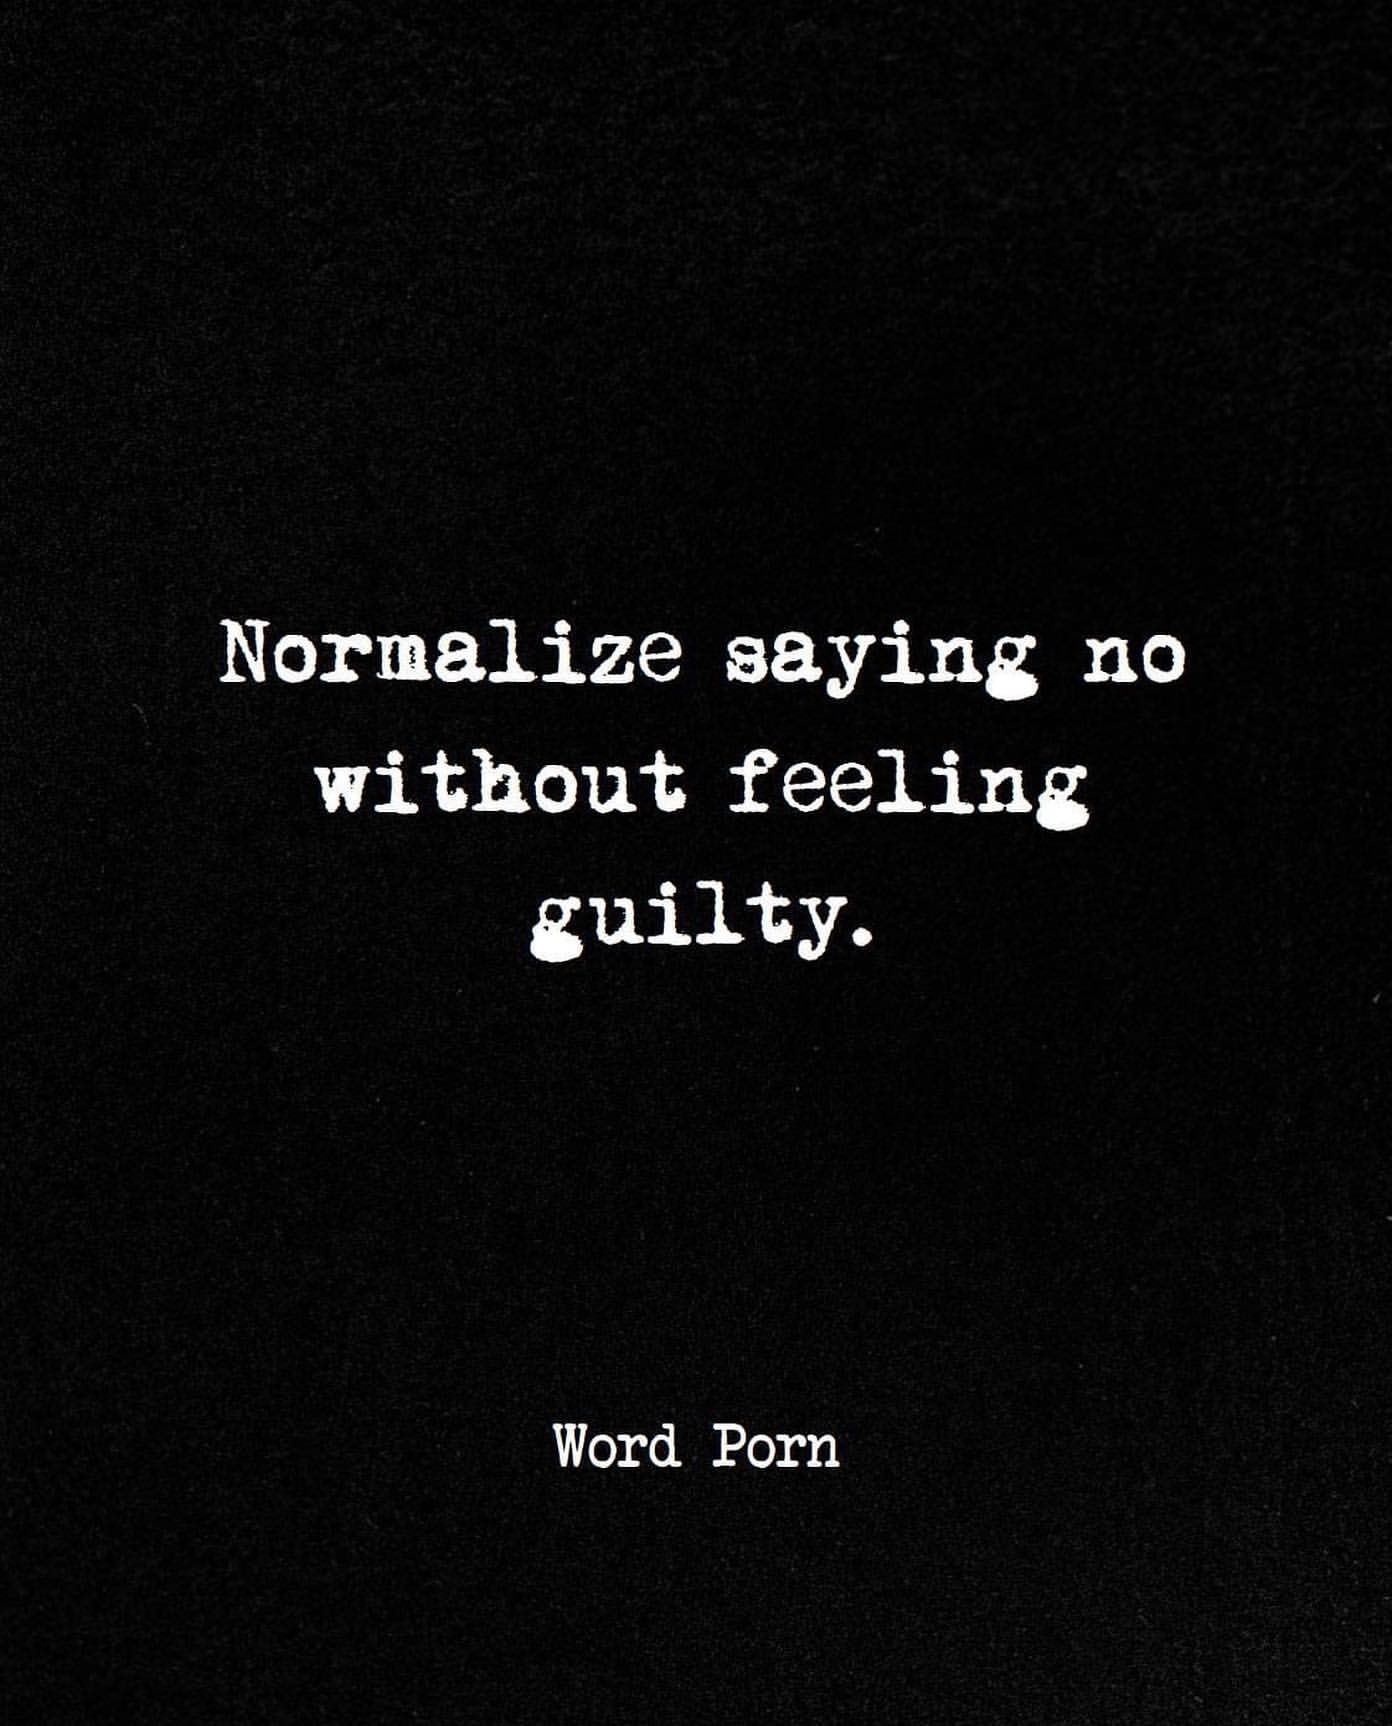 Normalize saying no without feeling guilty.